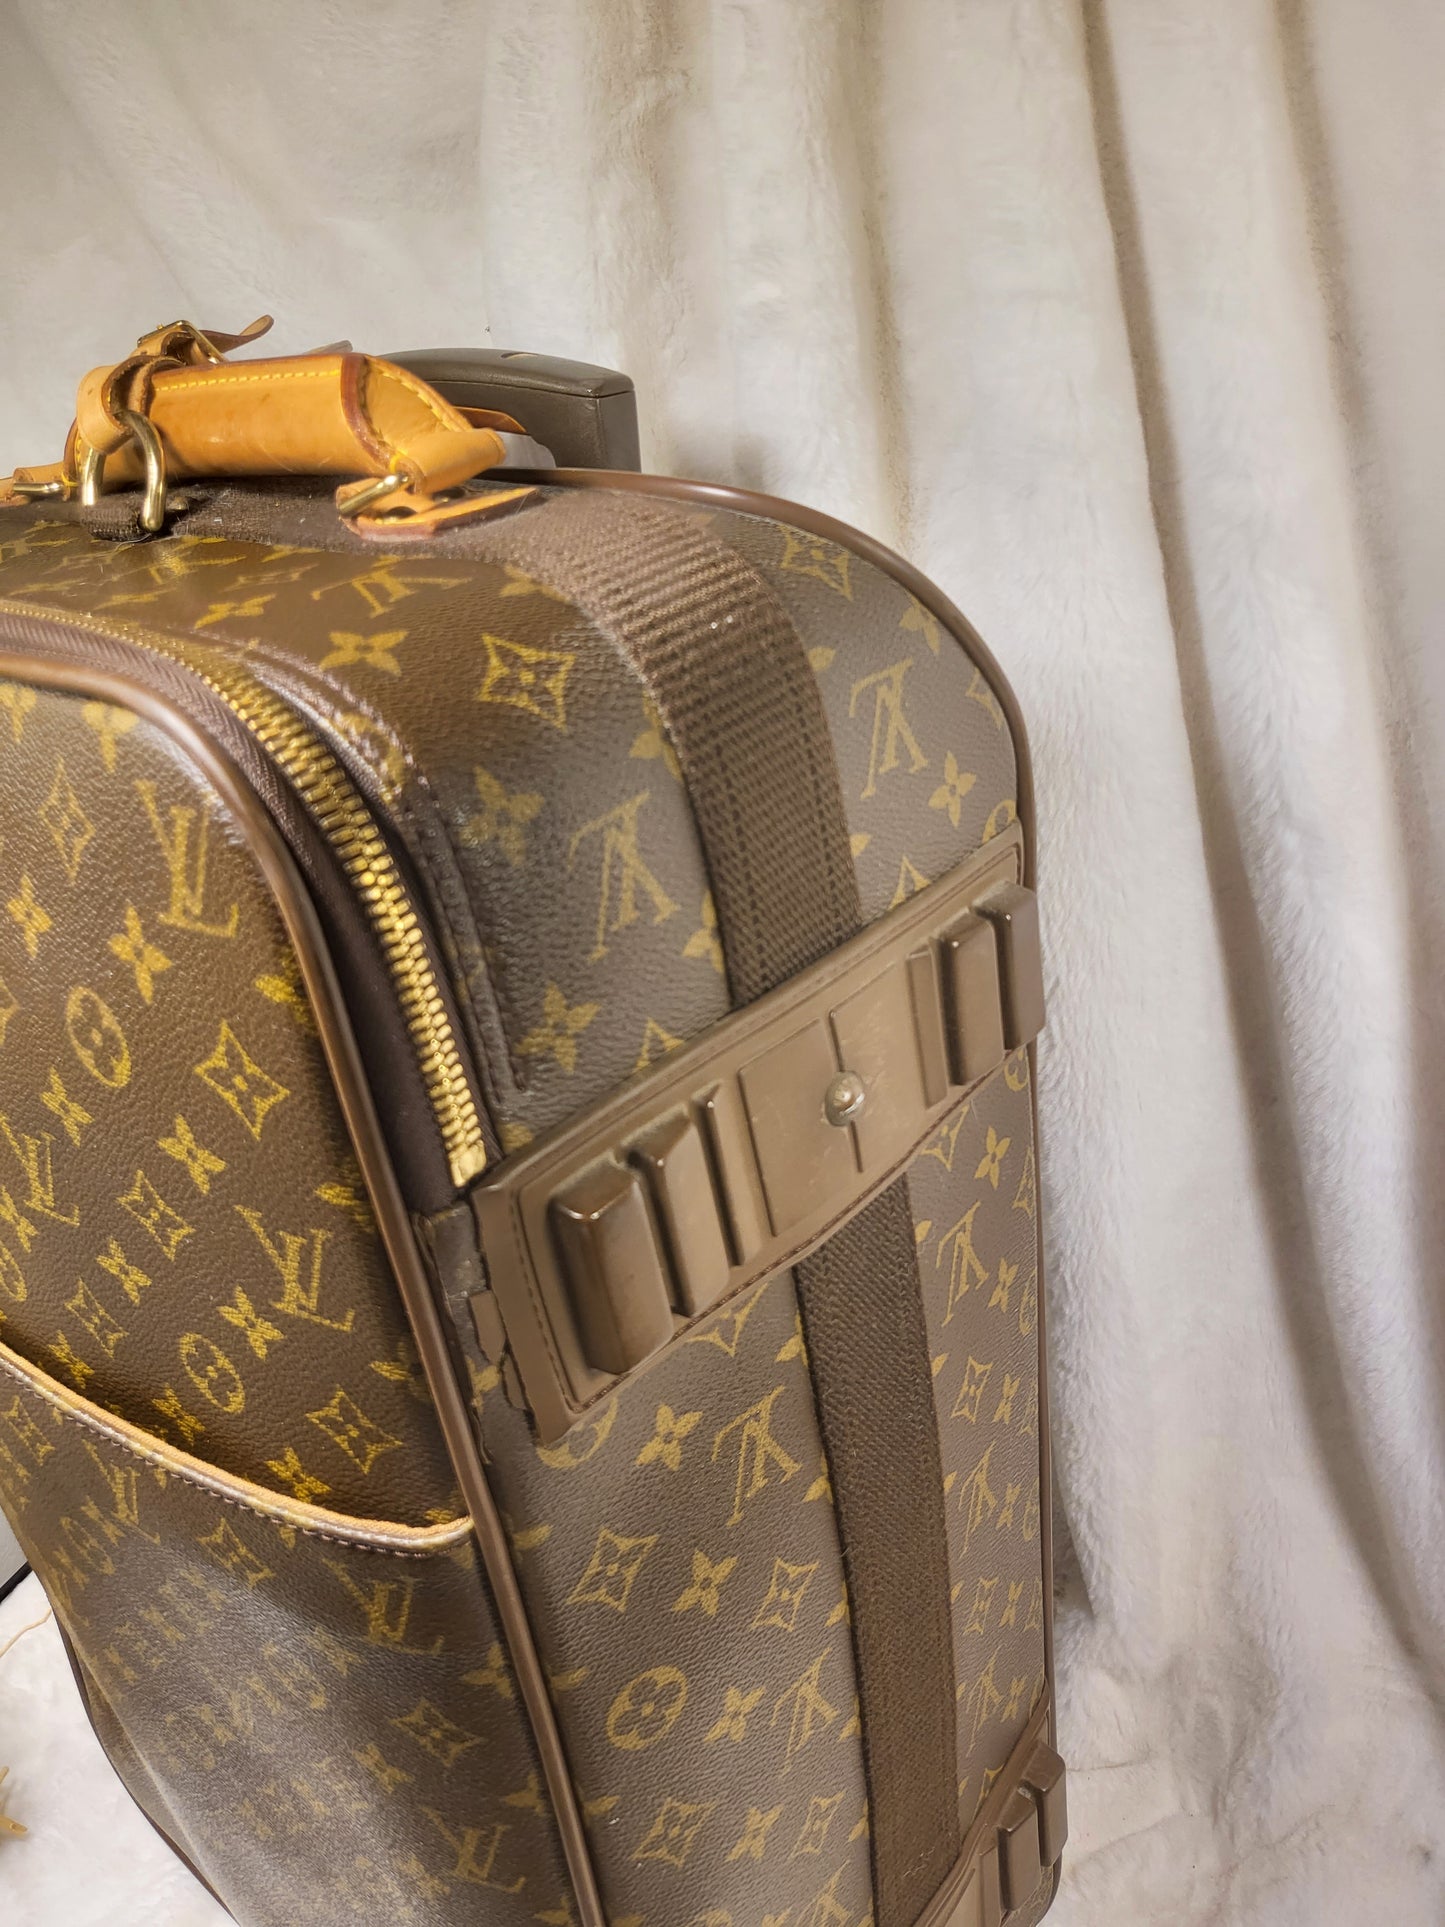 Authentic pre-owned Louis Vuitton Pegase 55 suitcase carry on